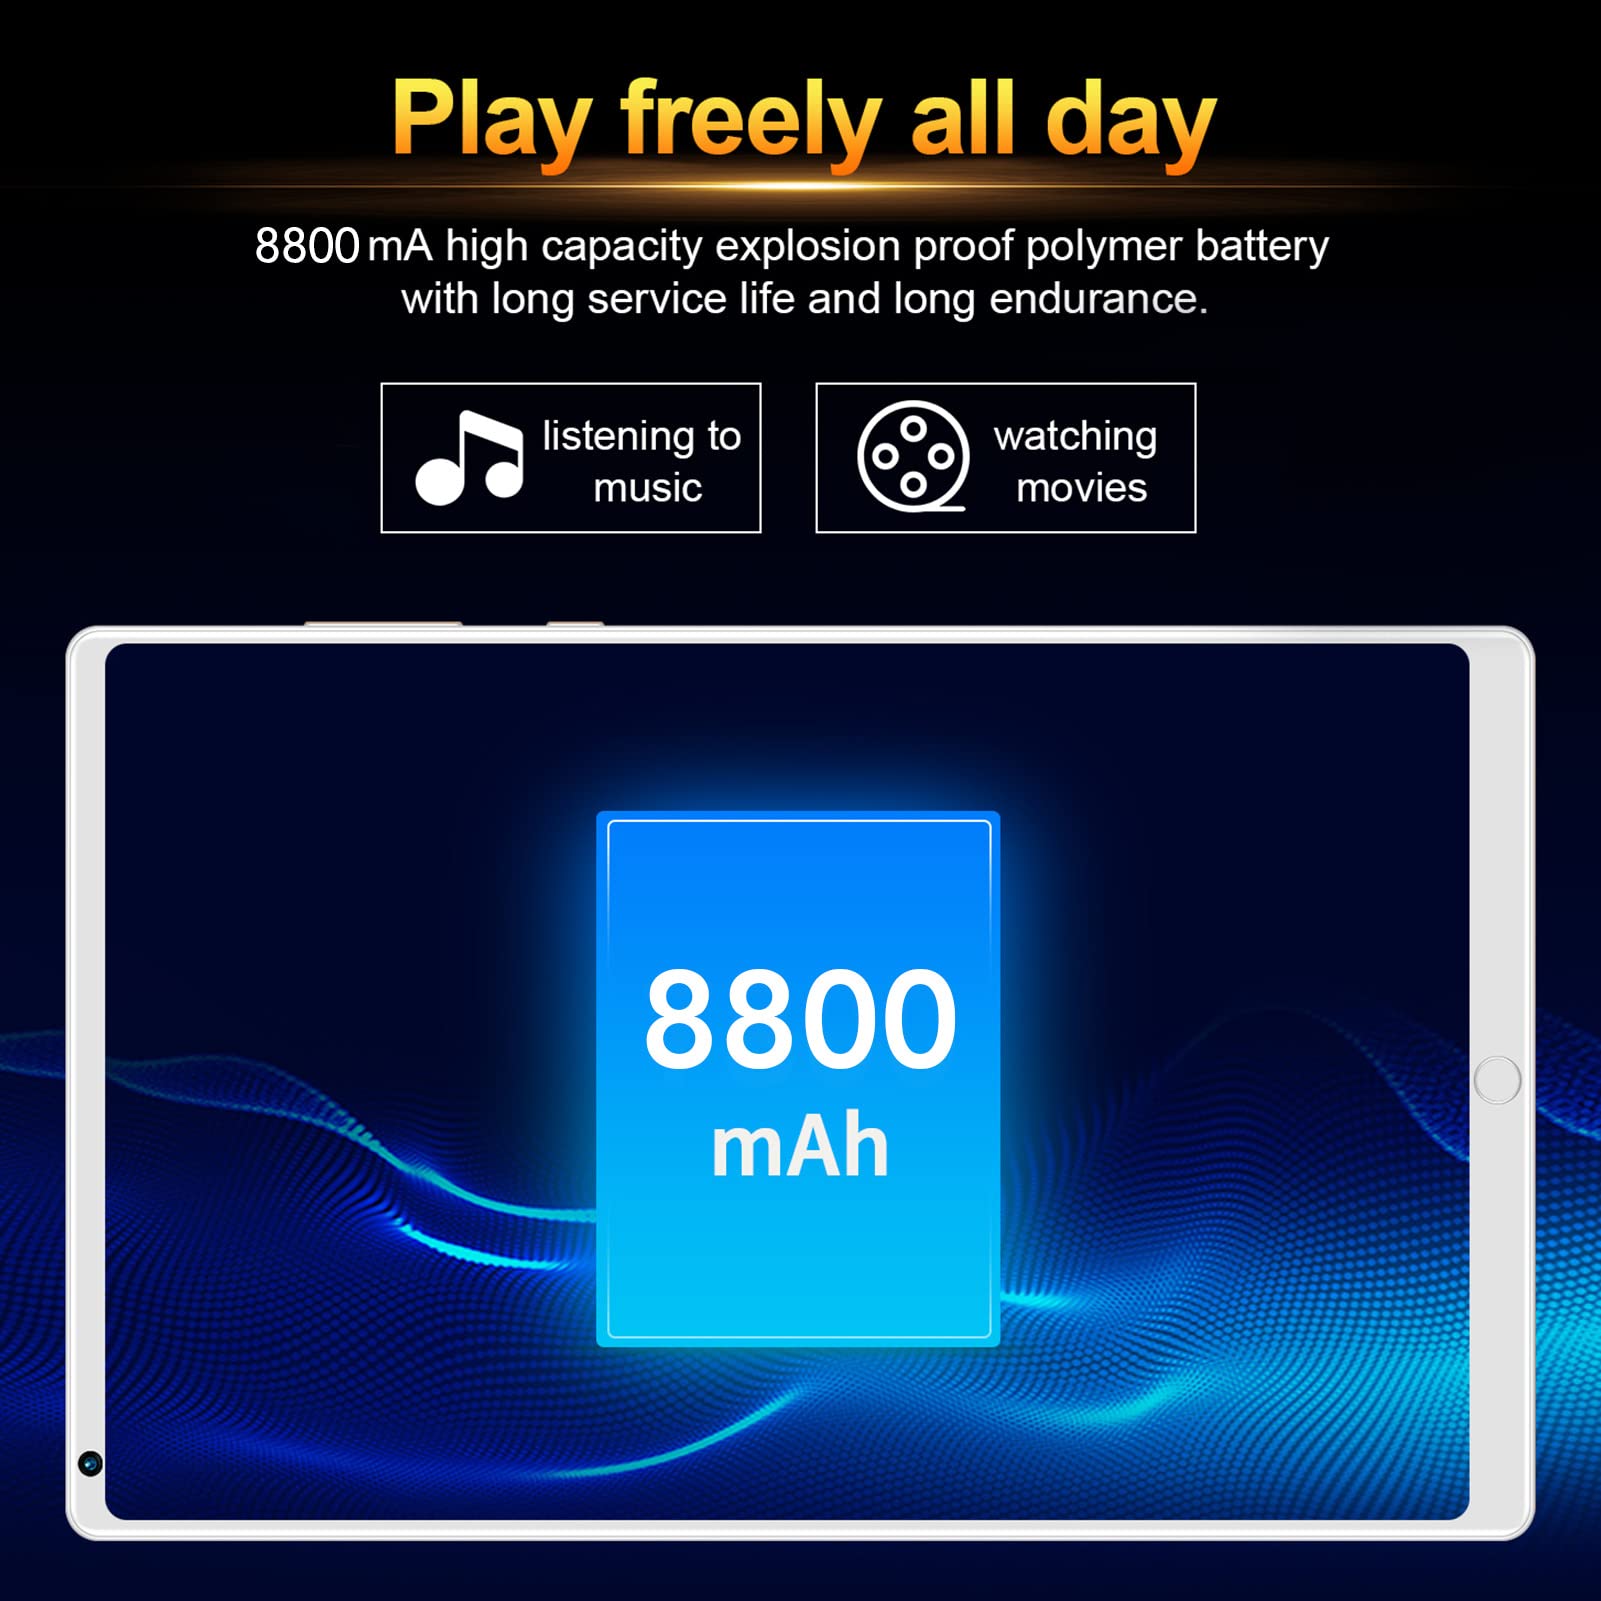 HD Tablet,8in Tablet,Portable Tablet Support Calls,4GB 64GB RAM,Front 200w Rear 800w, 8800mAh Battery Tablet,1920x1200 HD Tablet,Gaming Tablet for Kids Friends